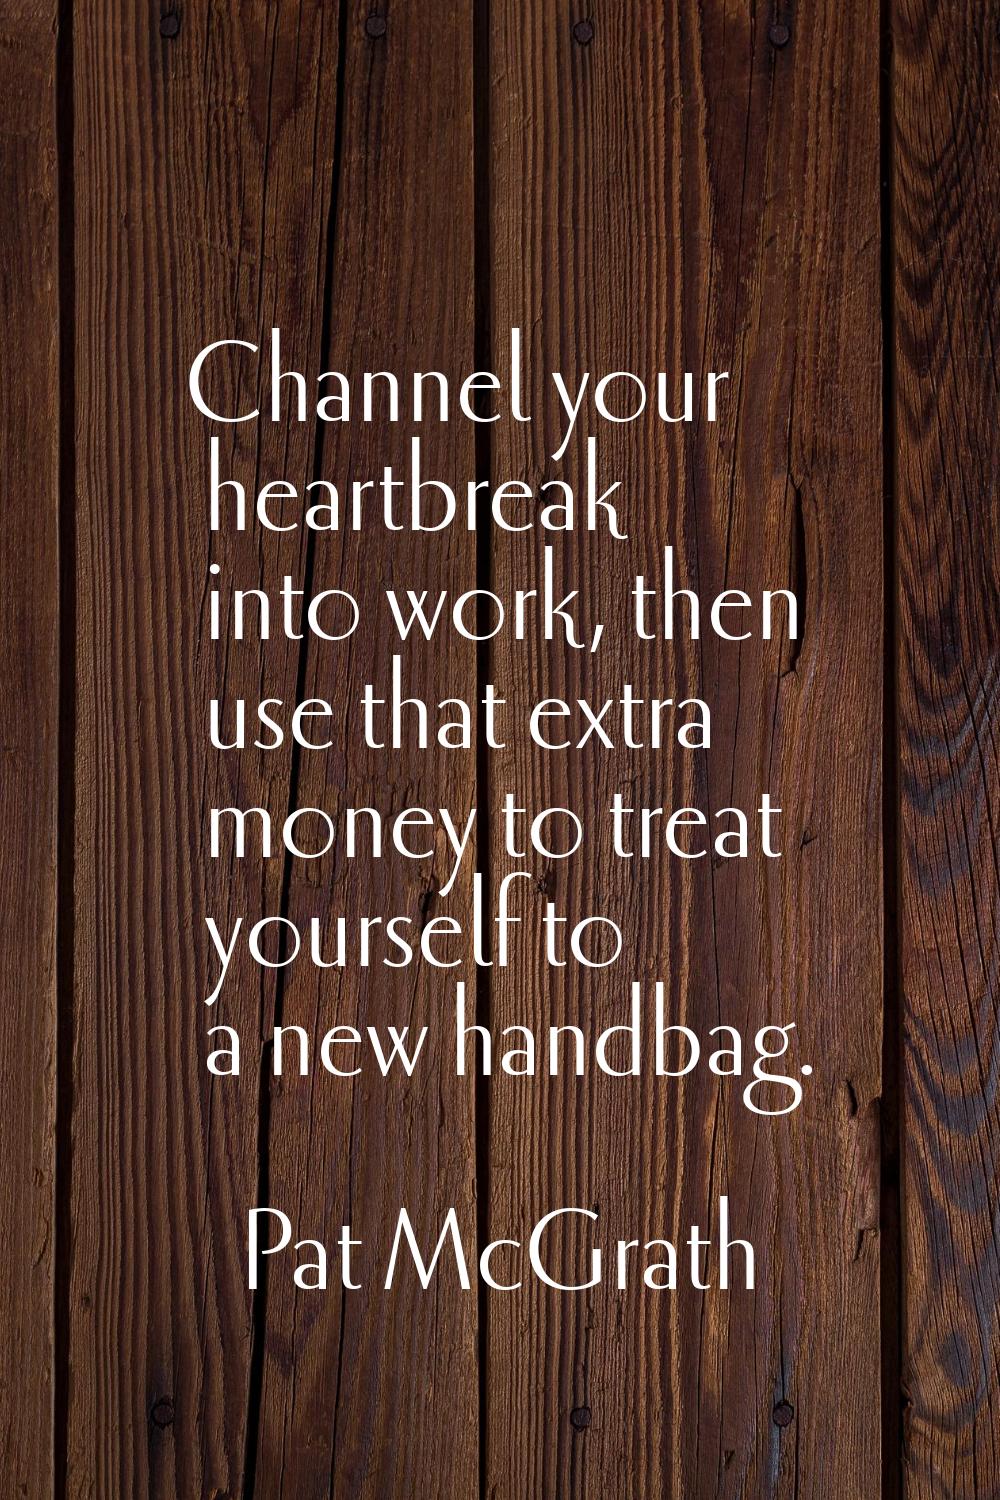 Channel your heartbreak into work, then use that extra money to treat yourself to a new handbag.